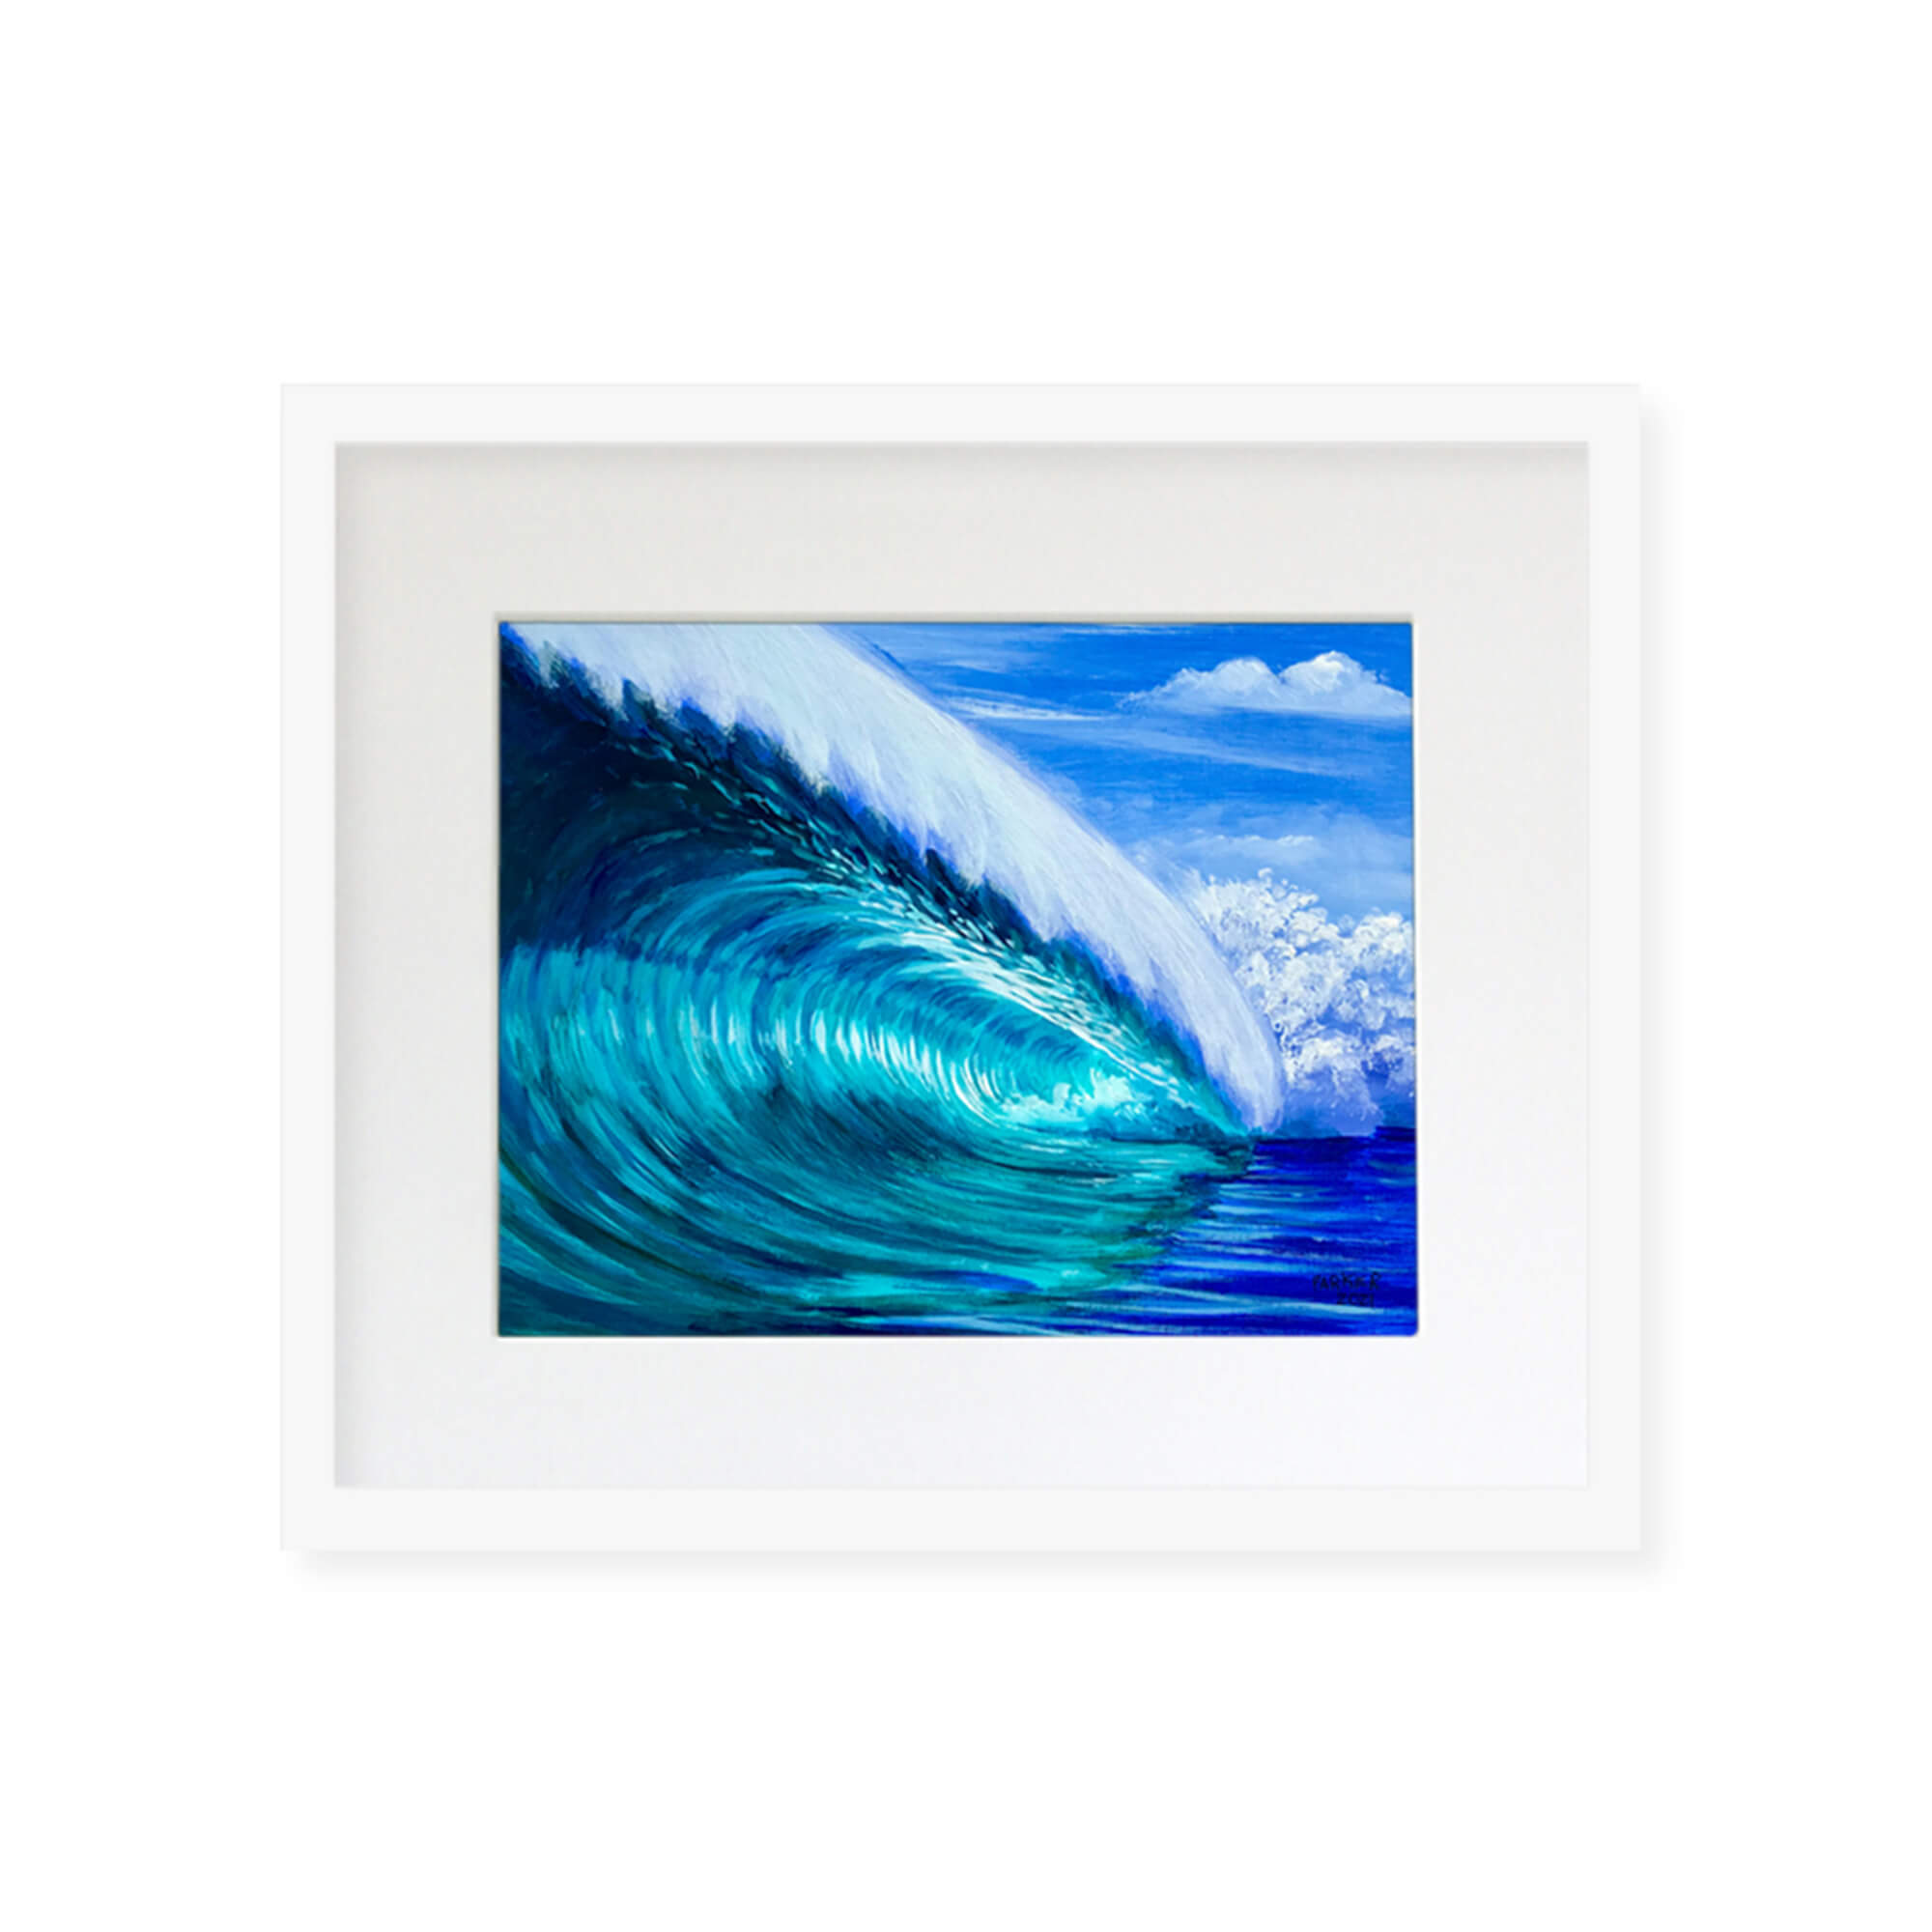 A painting of a crystal clear crashing wave by Hawaii artist Patrick Parker